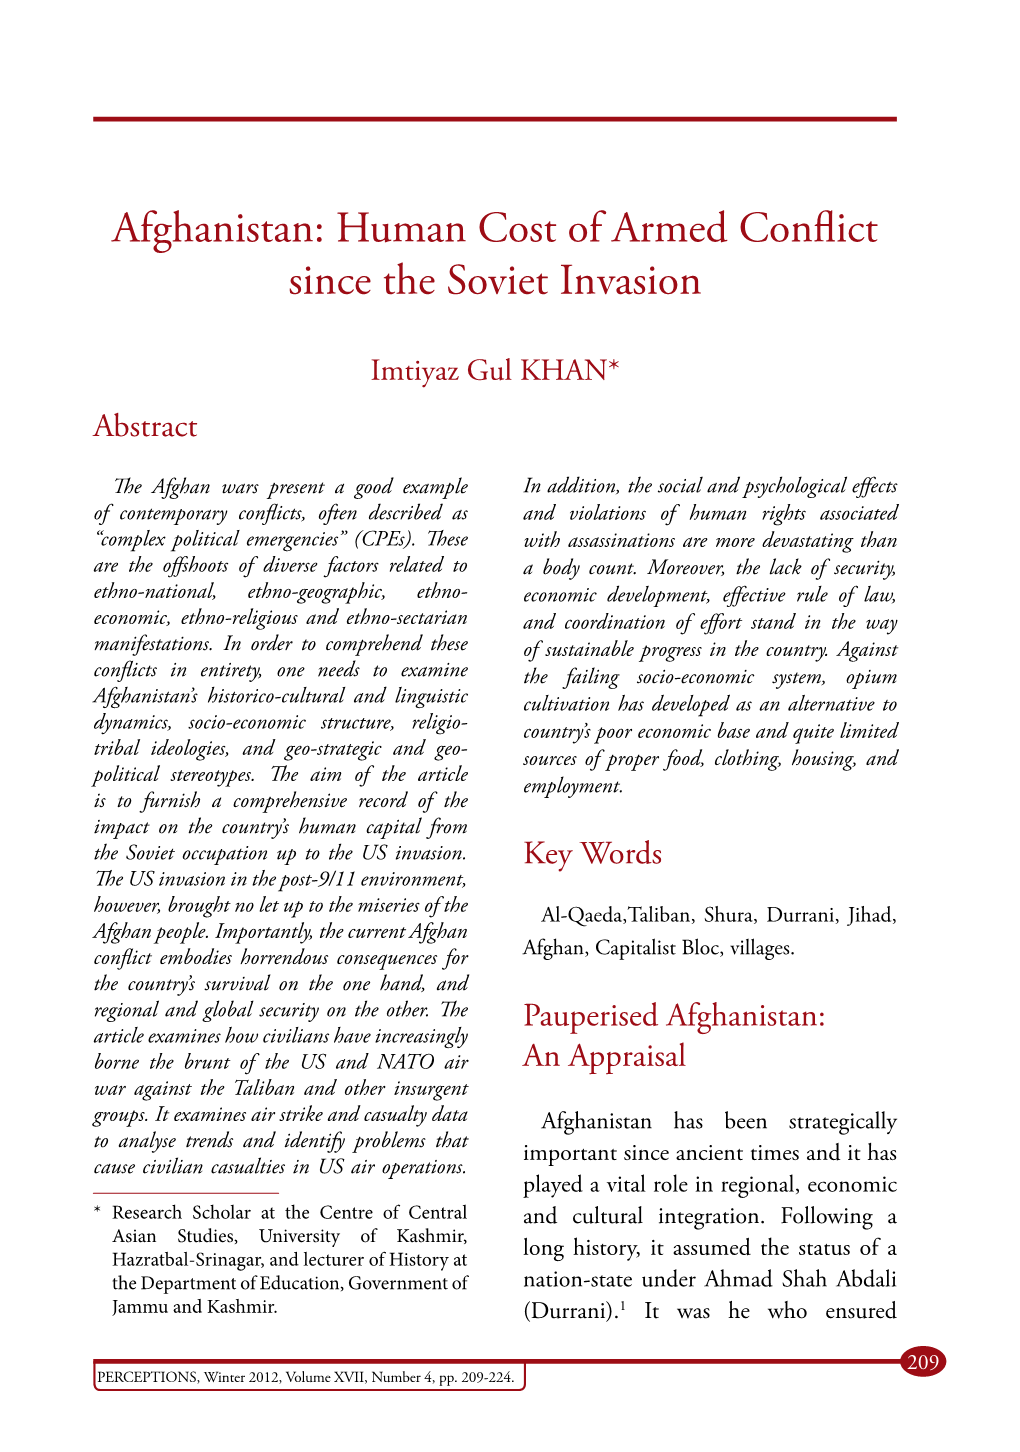 Afghanistan: Human Cost of Armed Conflict Since the Soviet Invasion